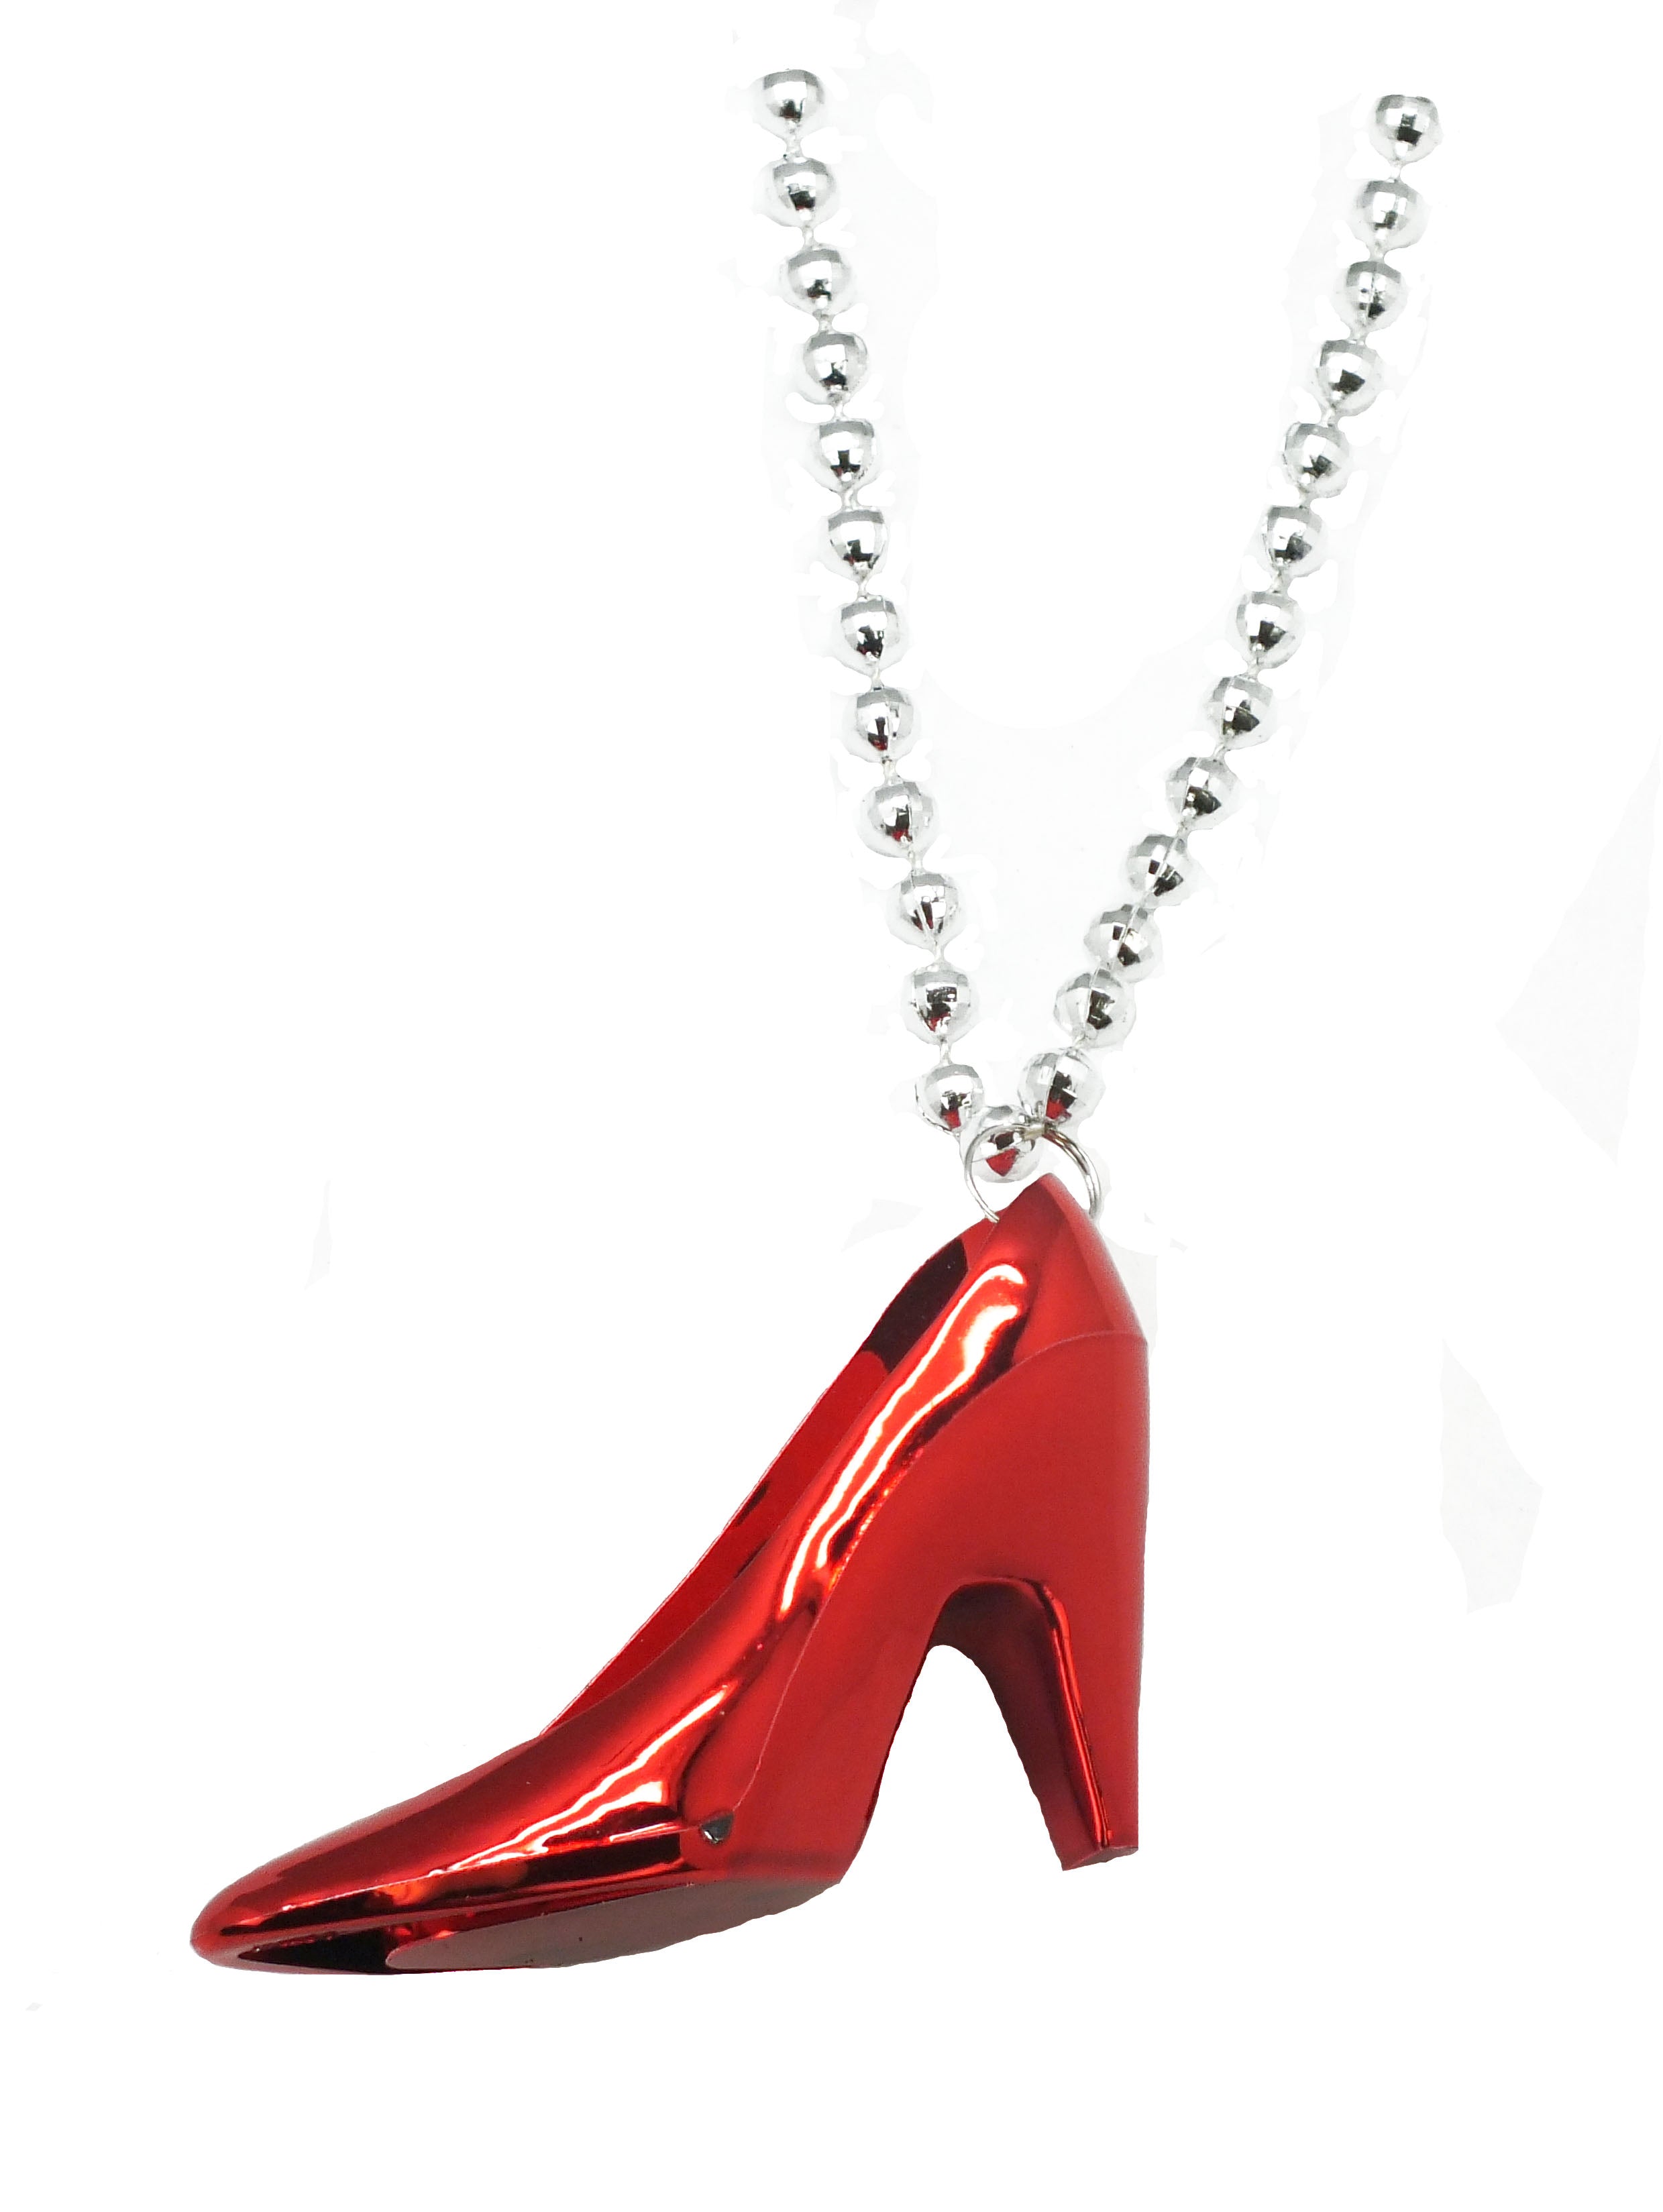 33" Silver Bead with Red High Heel